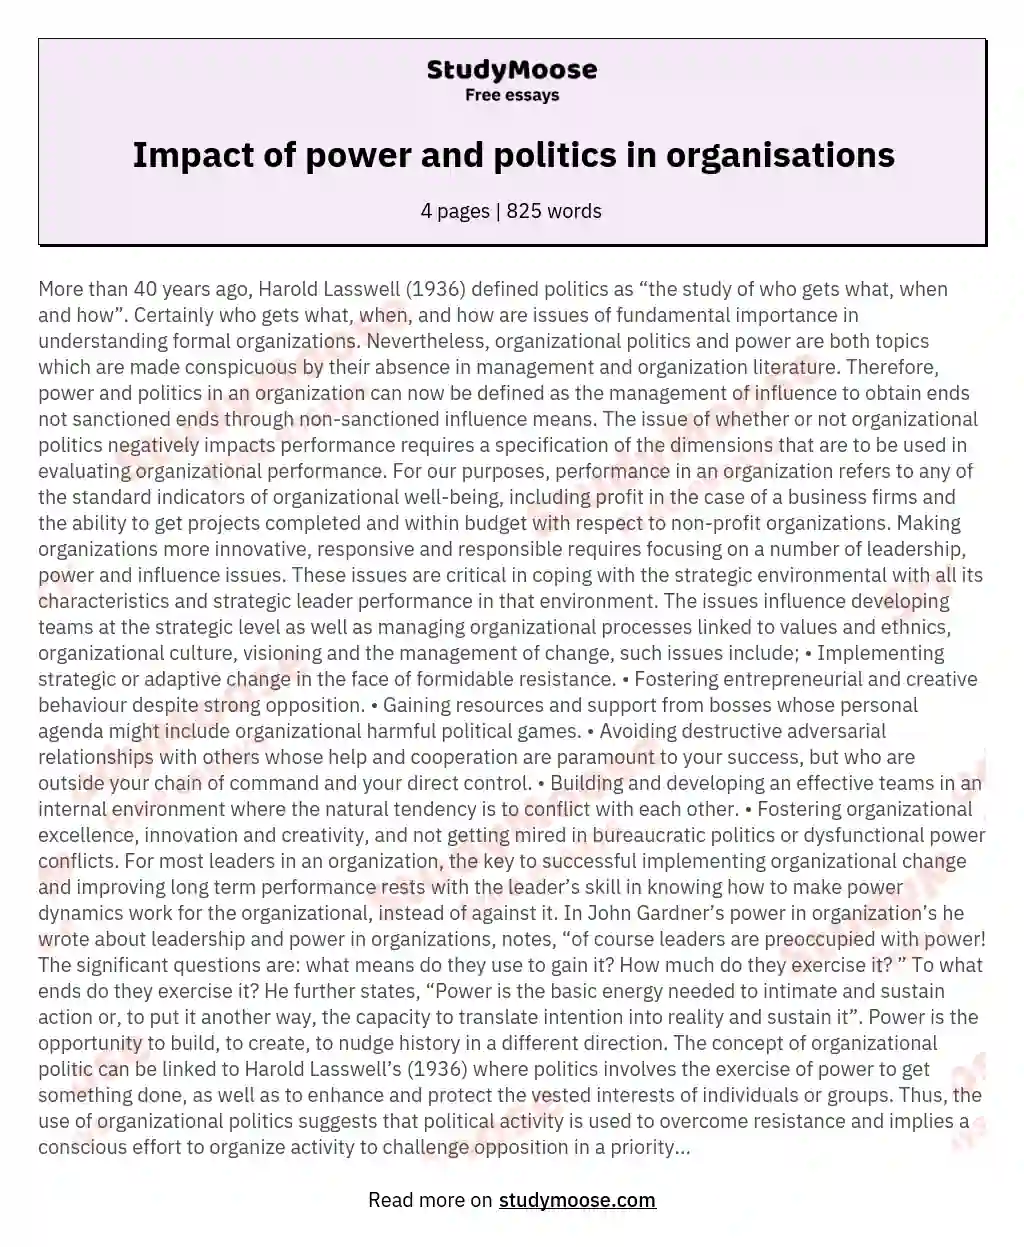 Impact of power and politics in organisations essay